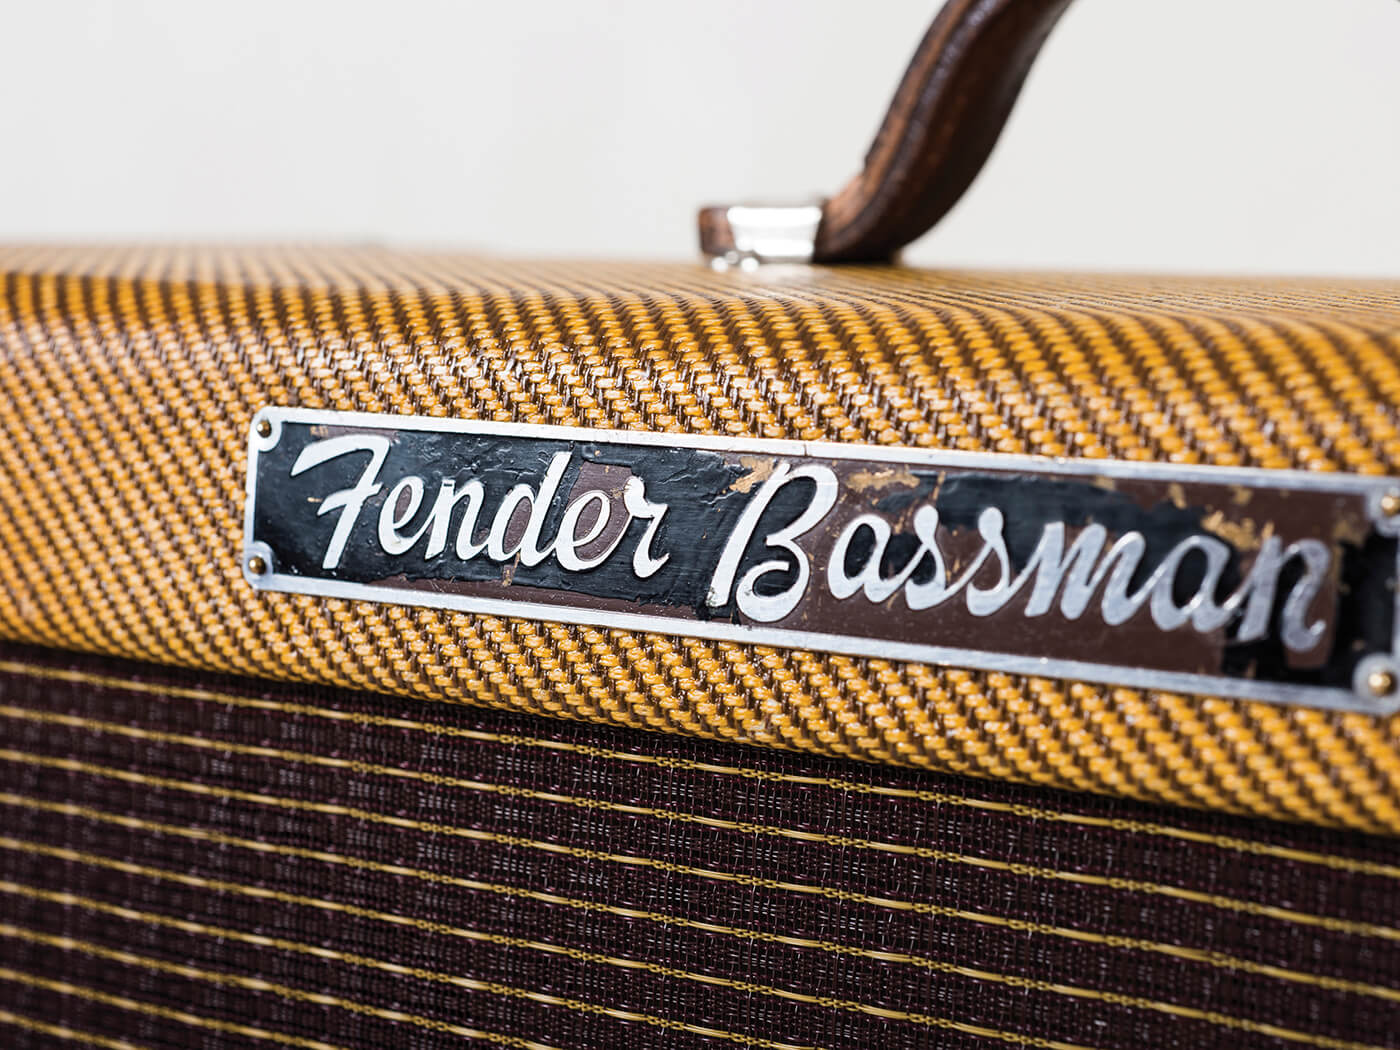 Why the Fender Bassman is the greatest amp all | Guitar.com |